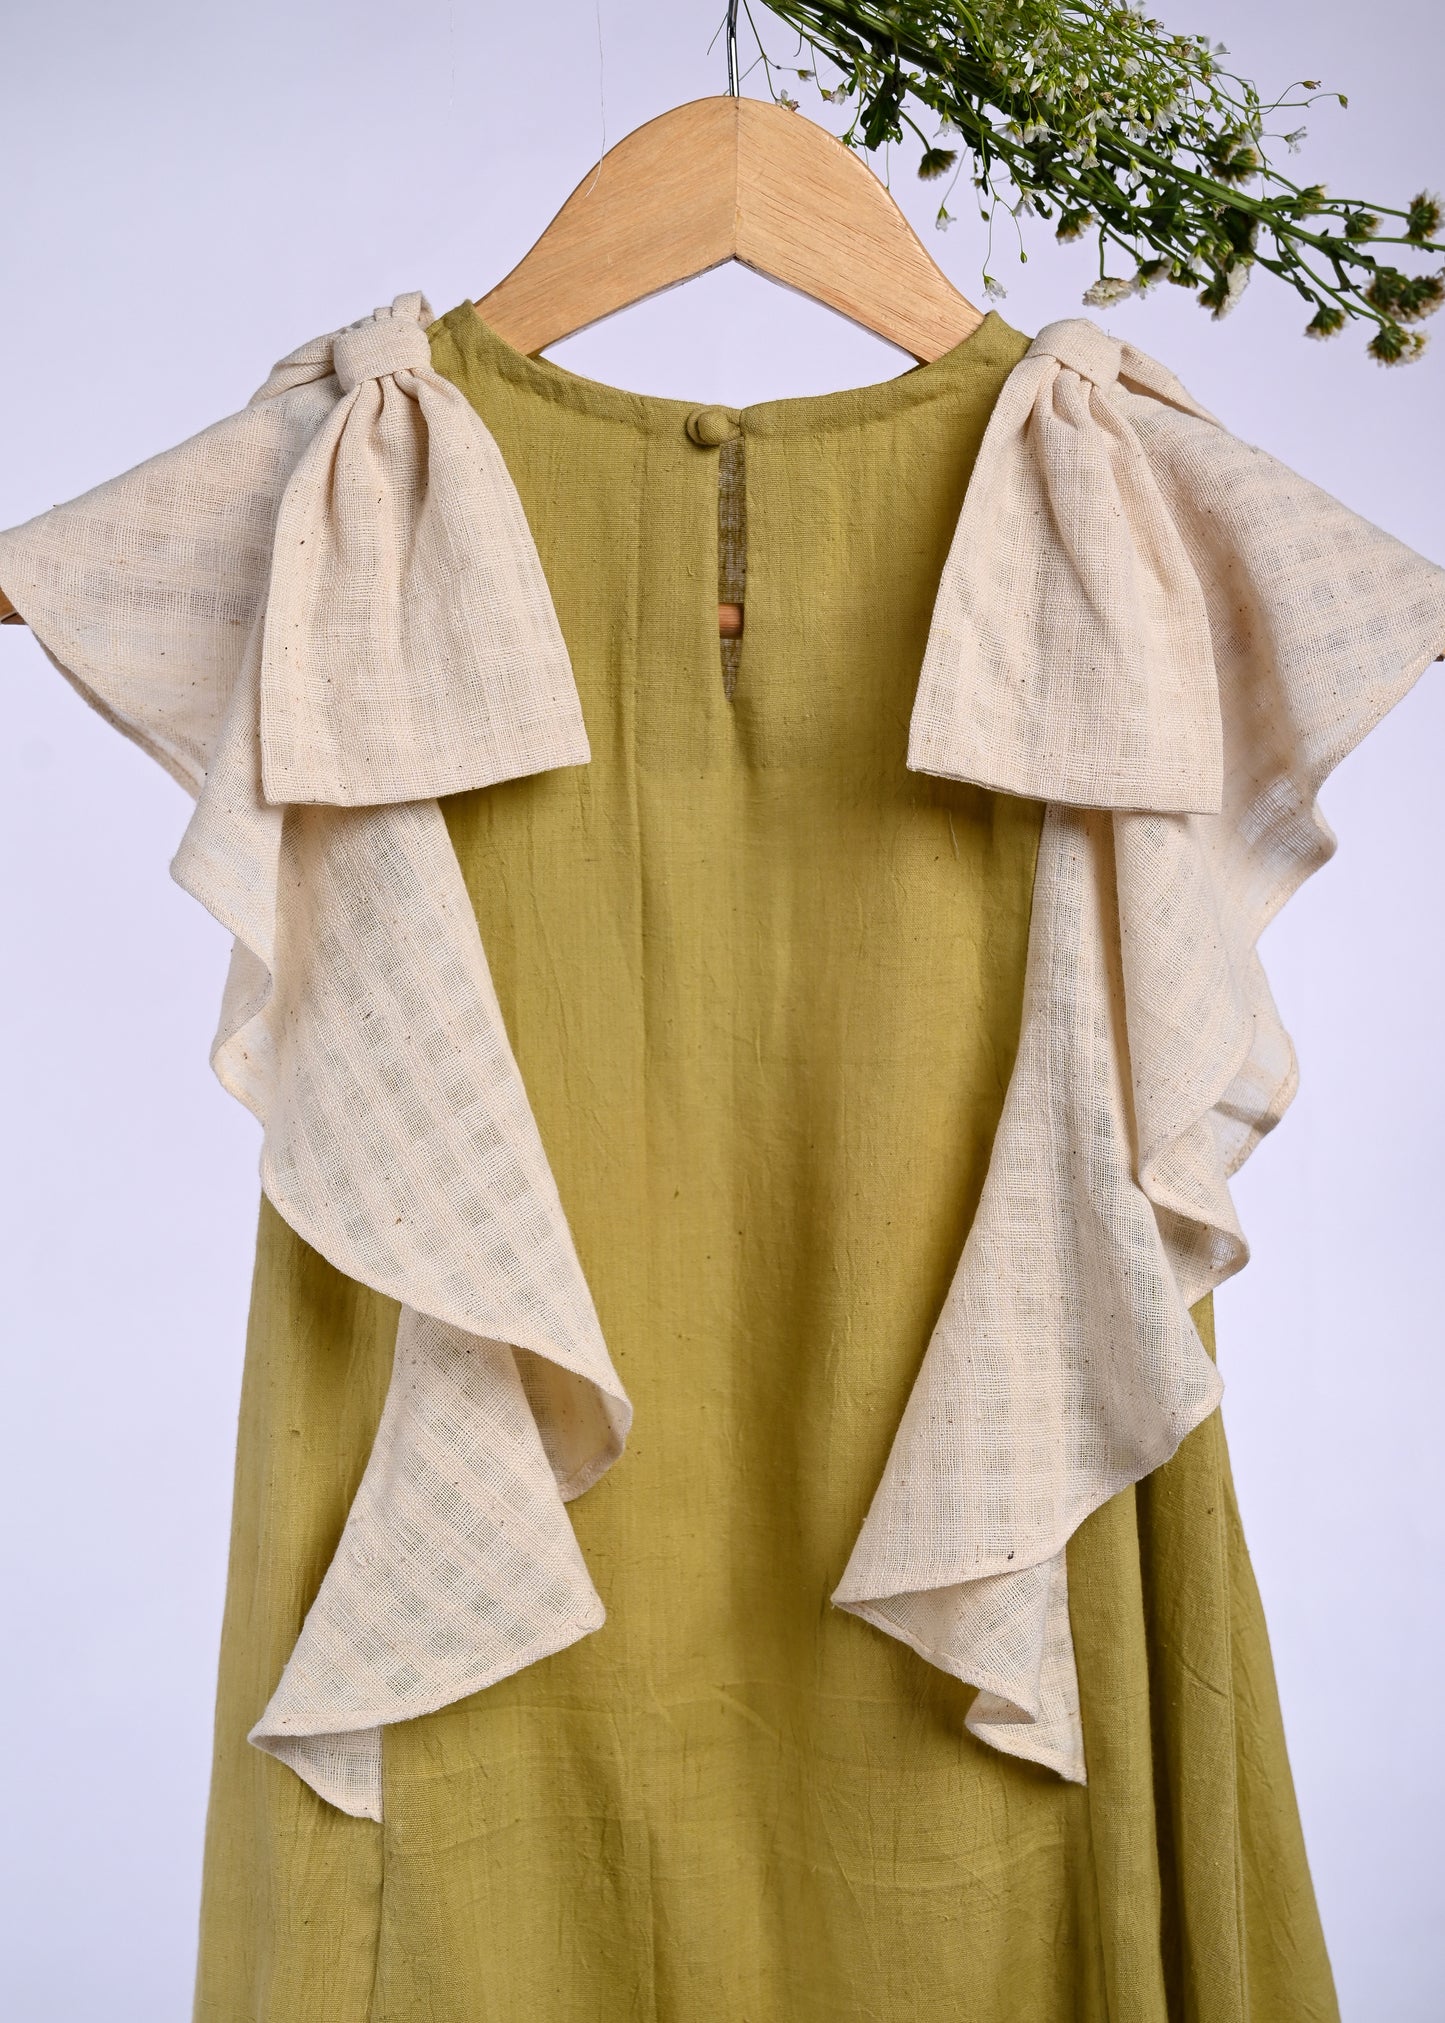 Handspun Handwoven Green Bow  Organic Cotton Dress for Girls | Sustainable Baby Organic Clothing | Dyed with Herbal Extracts | 100% Organic Cotton Kids Clothing  | ORA Organic India